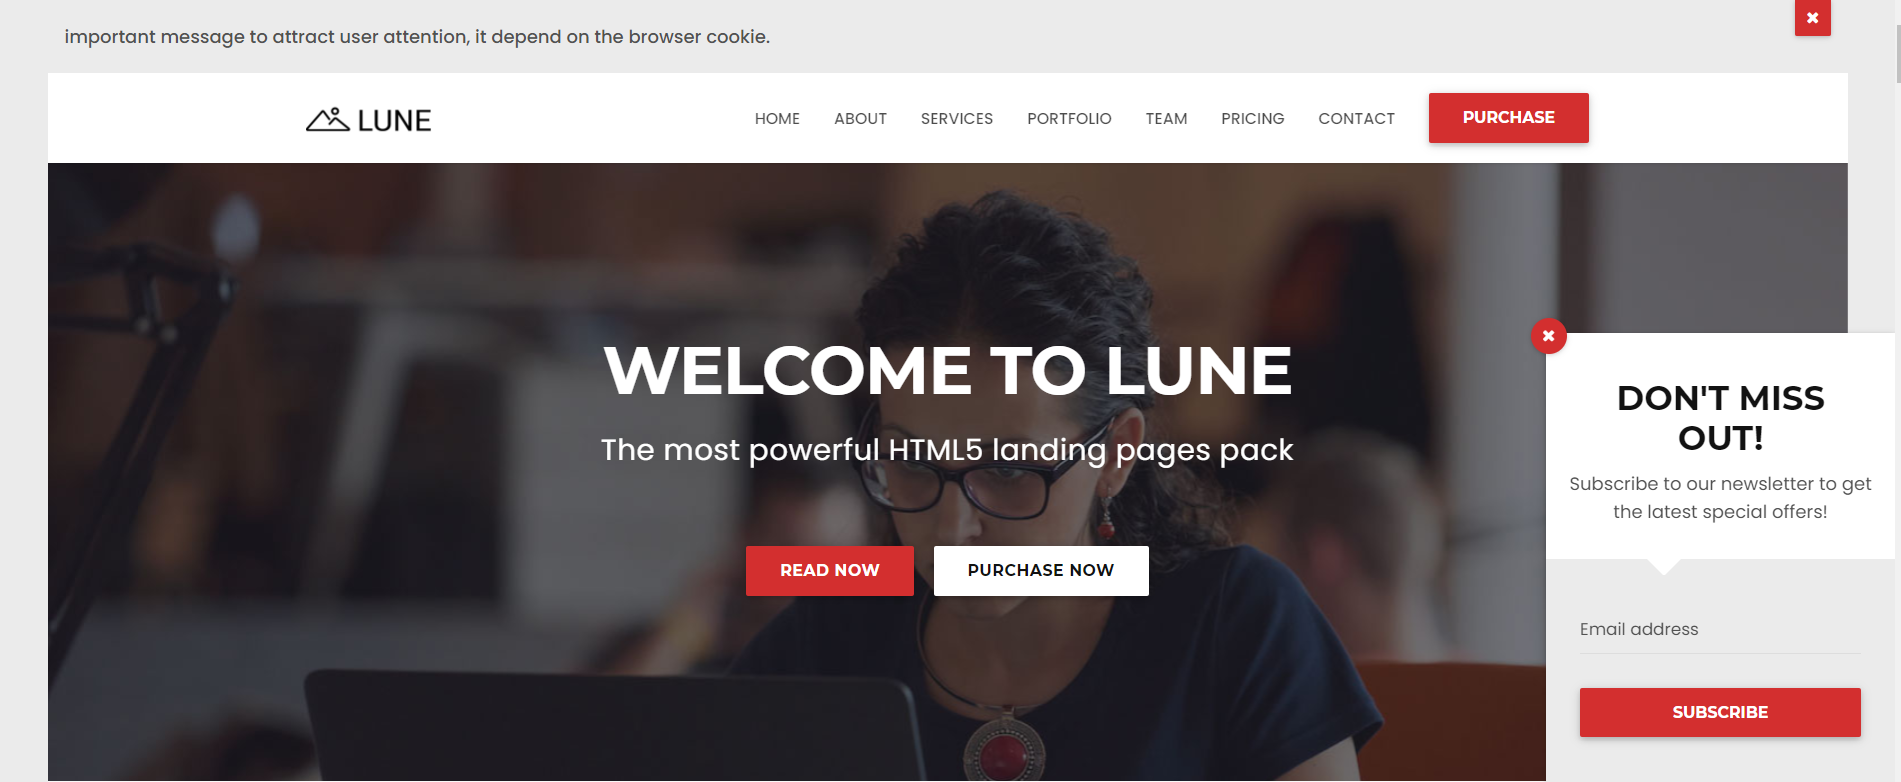 LUNE-HTML5-Landing-Pages-Pack-Template-Demo-1.png